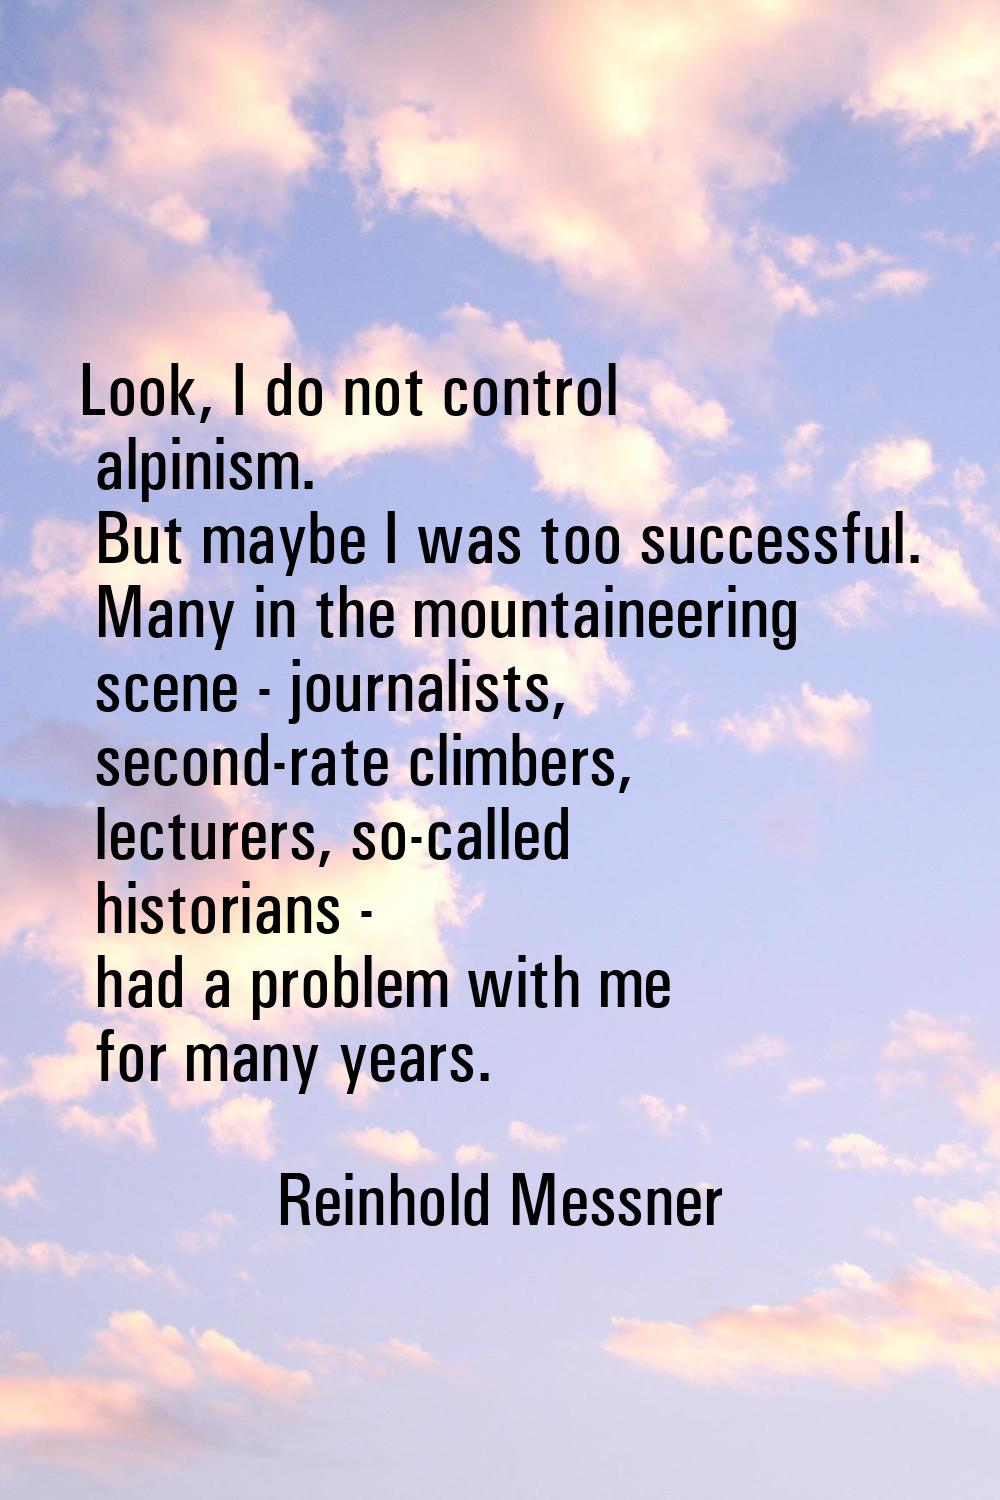 Look, I do not control alpinism. But maybe I was too successful. Many in the mountaineering scene -